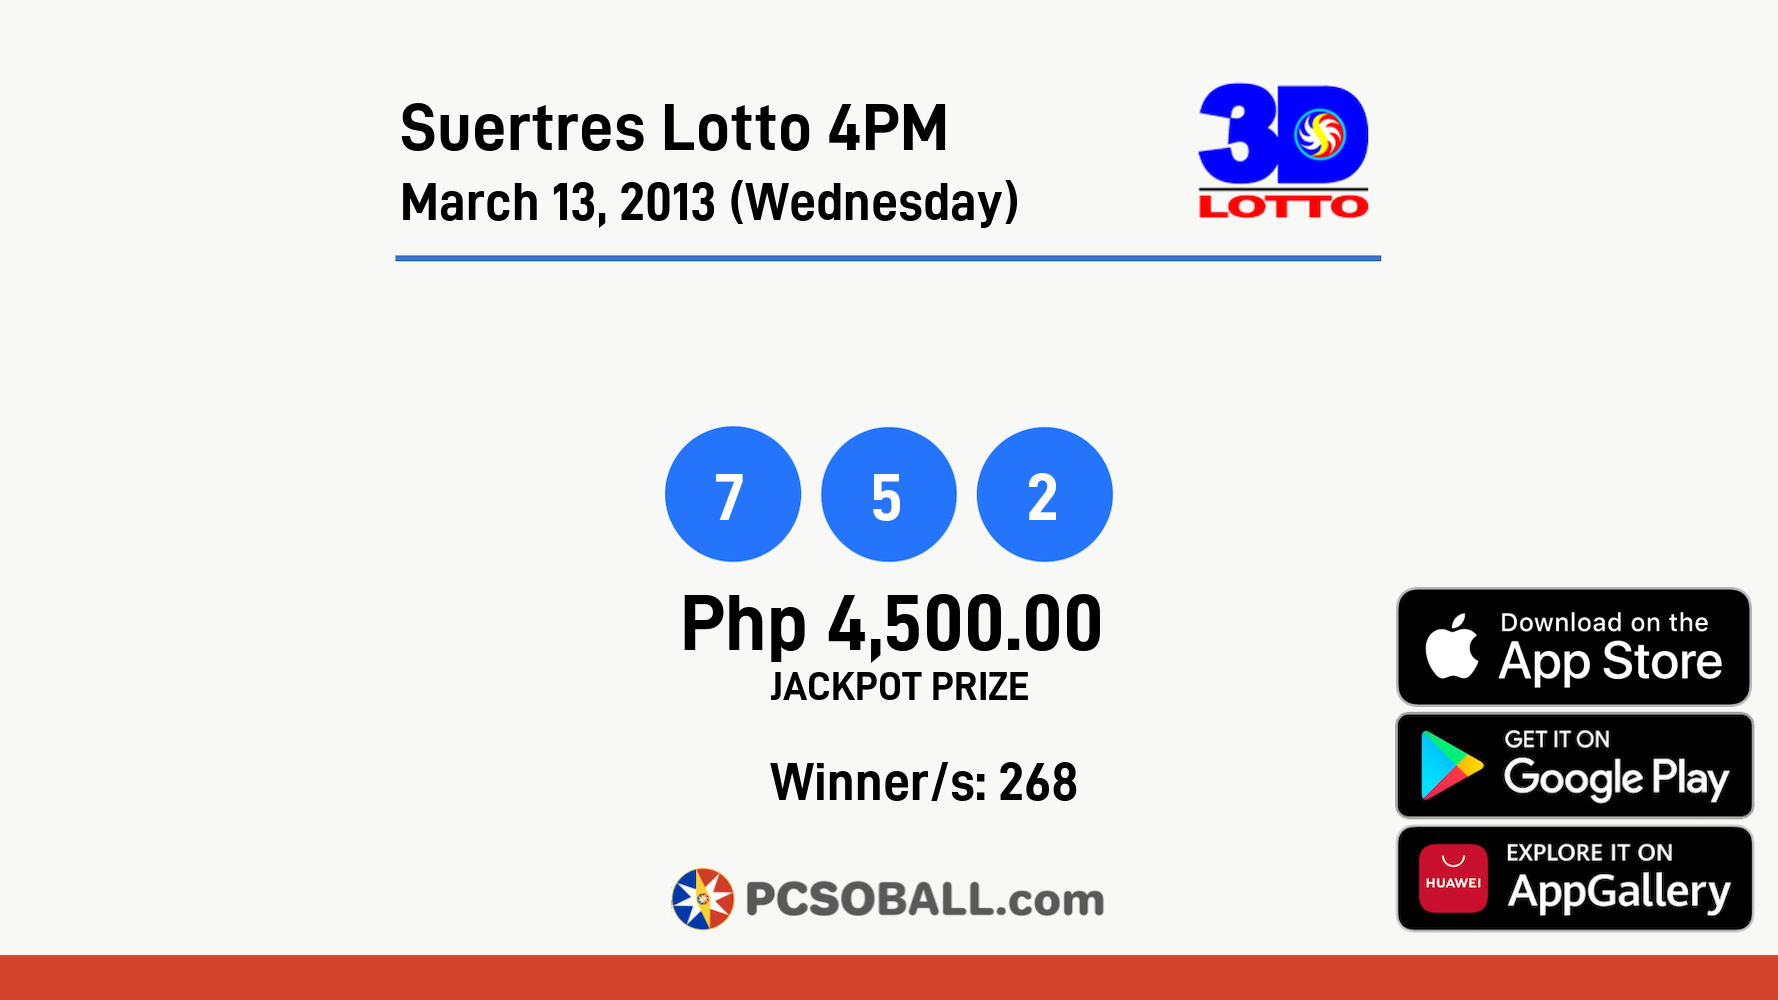 Suertres Lotto 4PM March 13, 2013 (Wednesday) Result